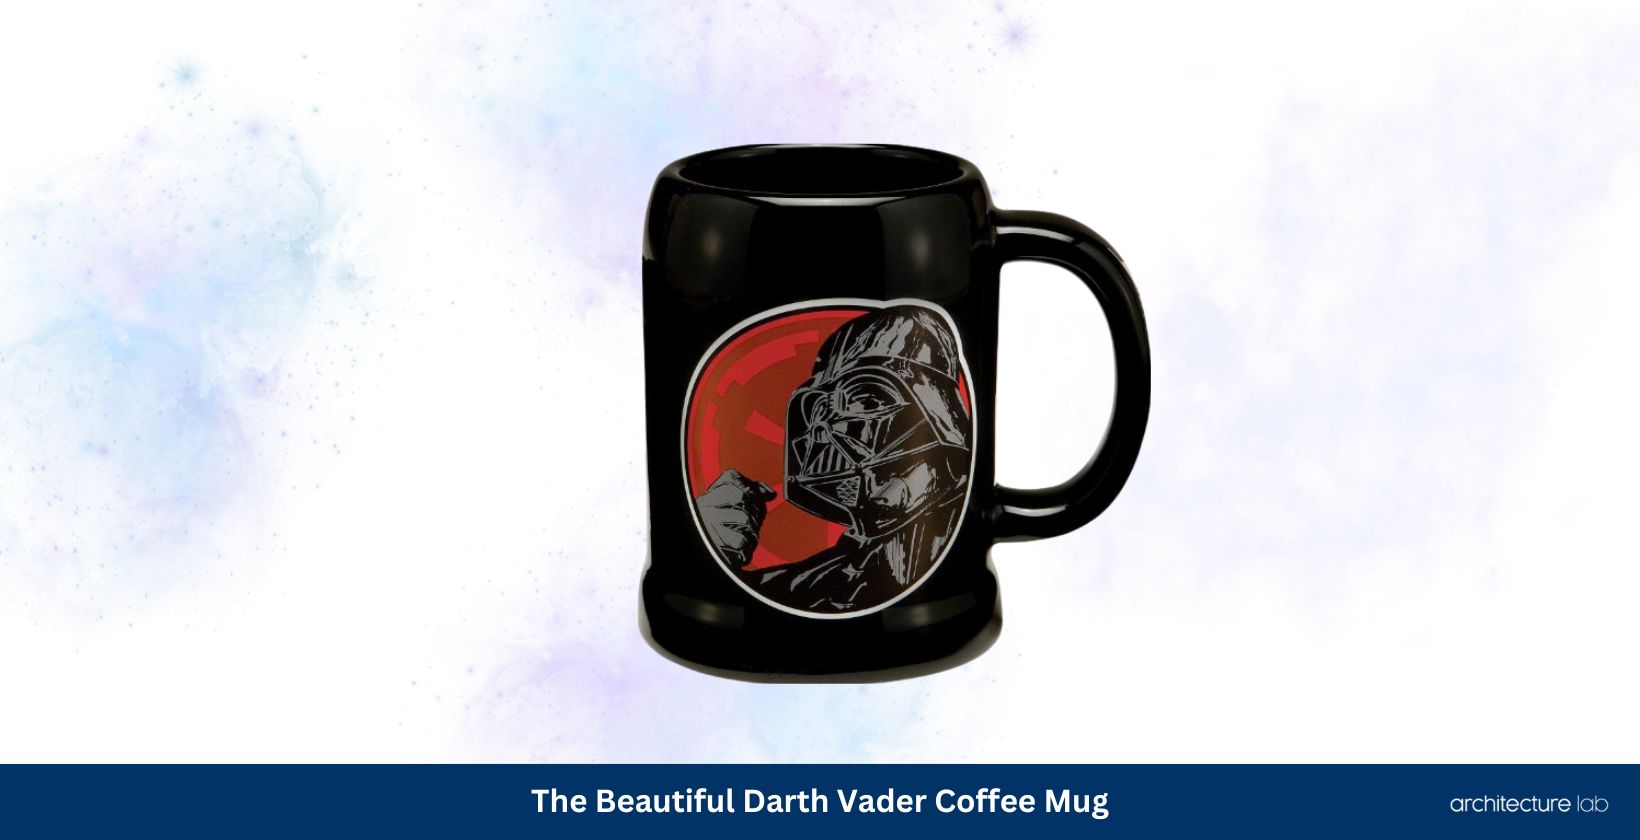 A brilliant replacement for your boring everyday coffee mug – the beautiful darth vader coffee mug